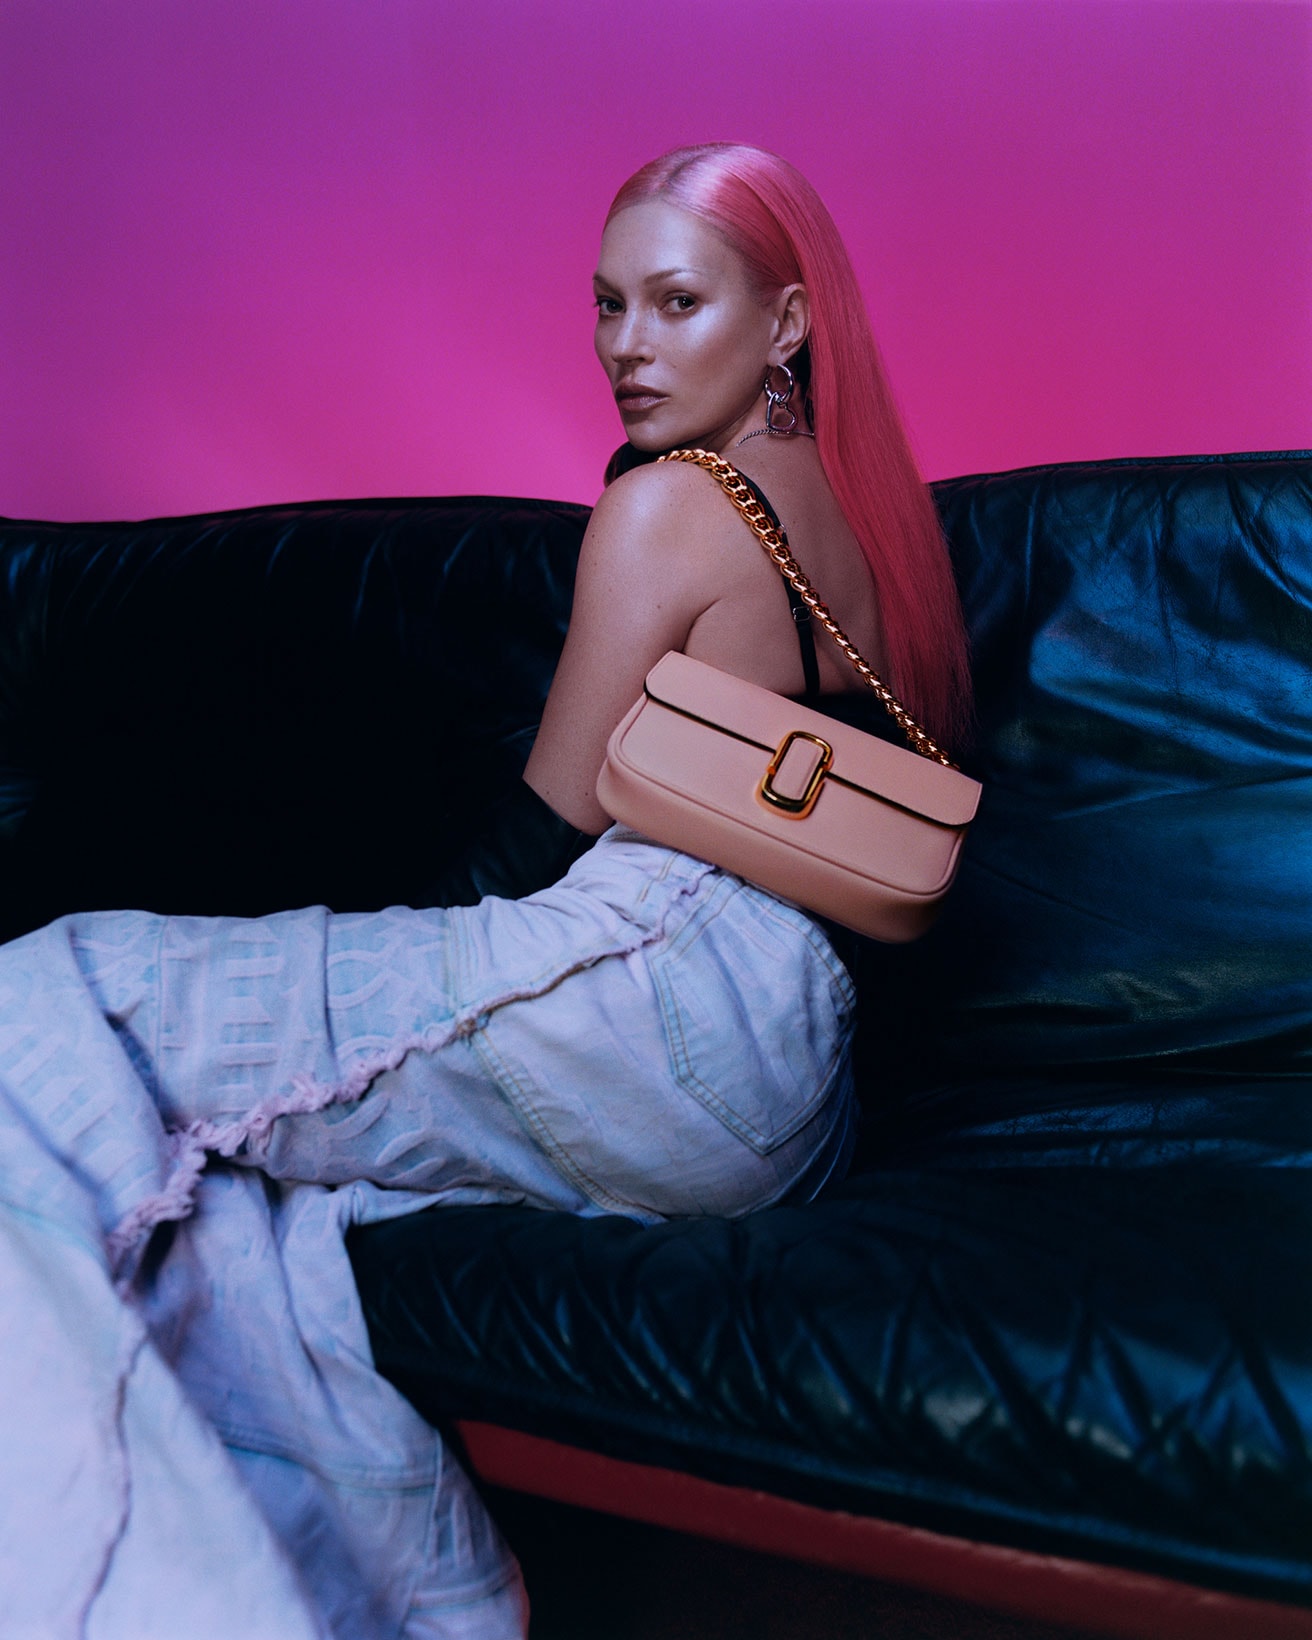 Kate Moss Marc Jacobs Resort 2023 Campaign Harley Weir Images